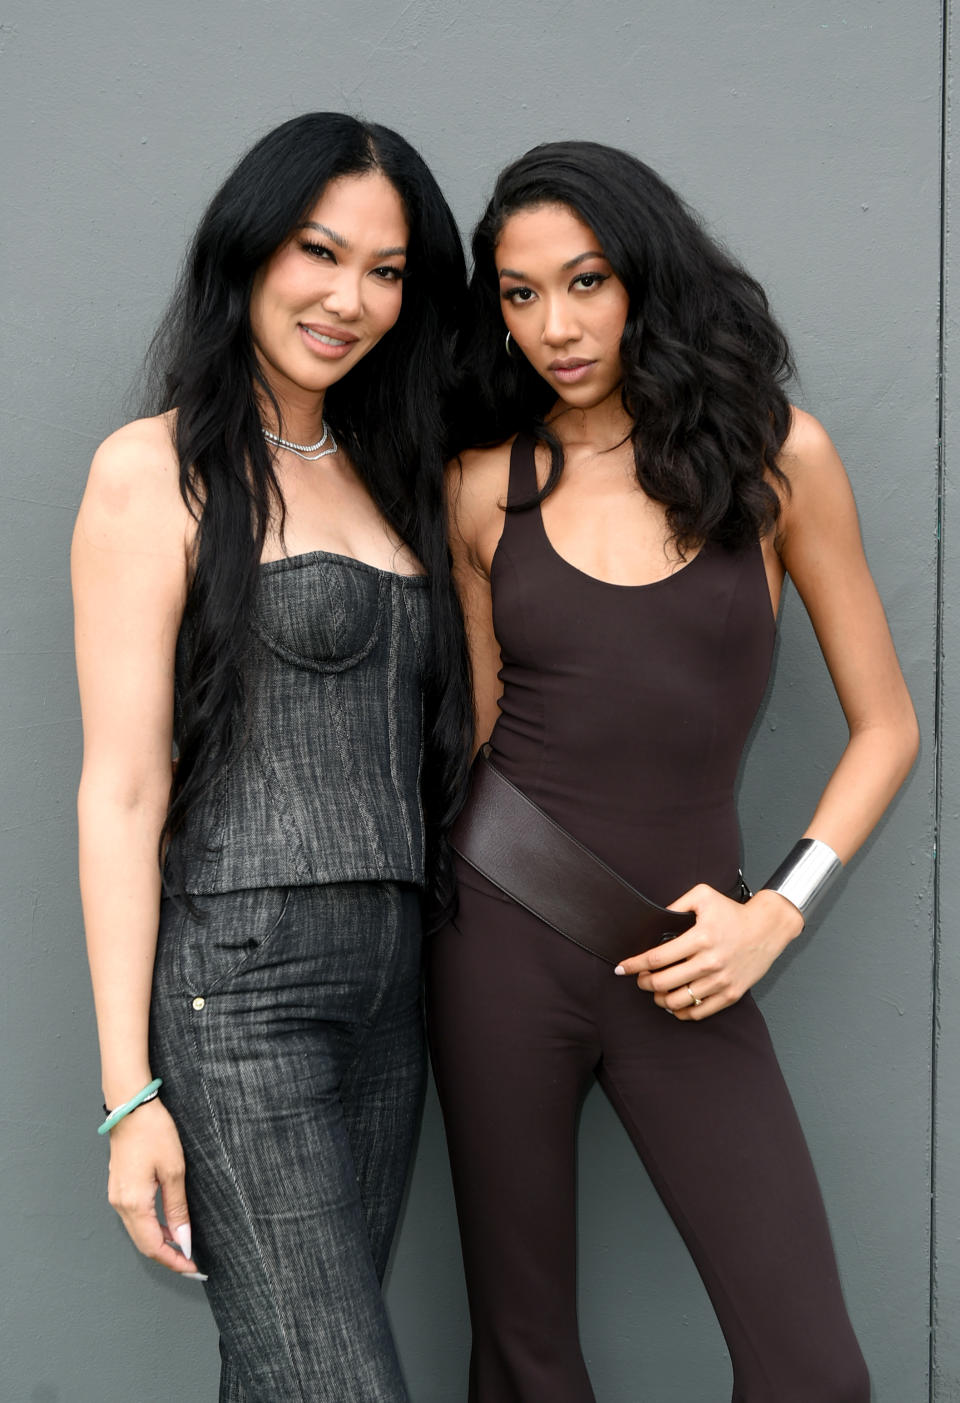 LOS ANGELES, CALIFORNIA – NOVEMBER 18: (L-R) Kimora Lee Simmons and Aoki Lee Simmons attend Teen Vogue Summit 2023 on November 18, 2023 in Los Angeles, California. (Photo by Vivien Killilea/Getty Images for Teen Vogue)